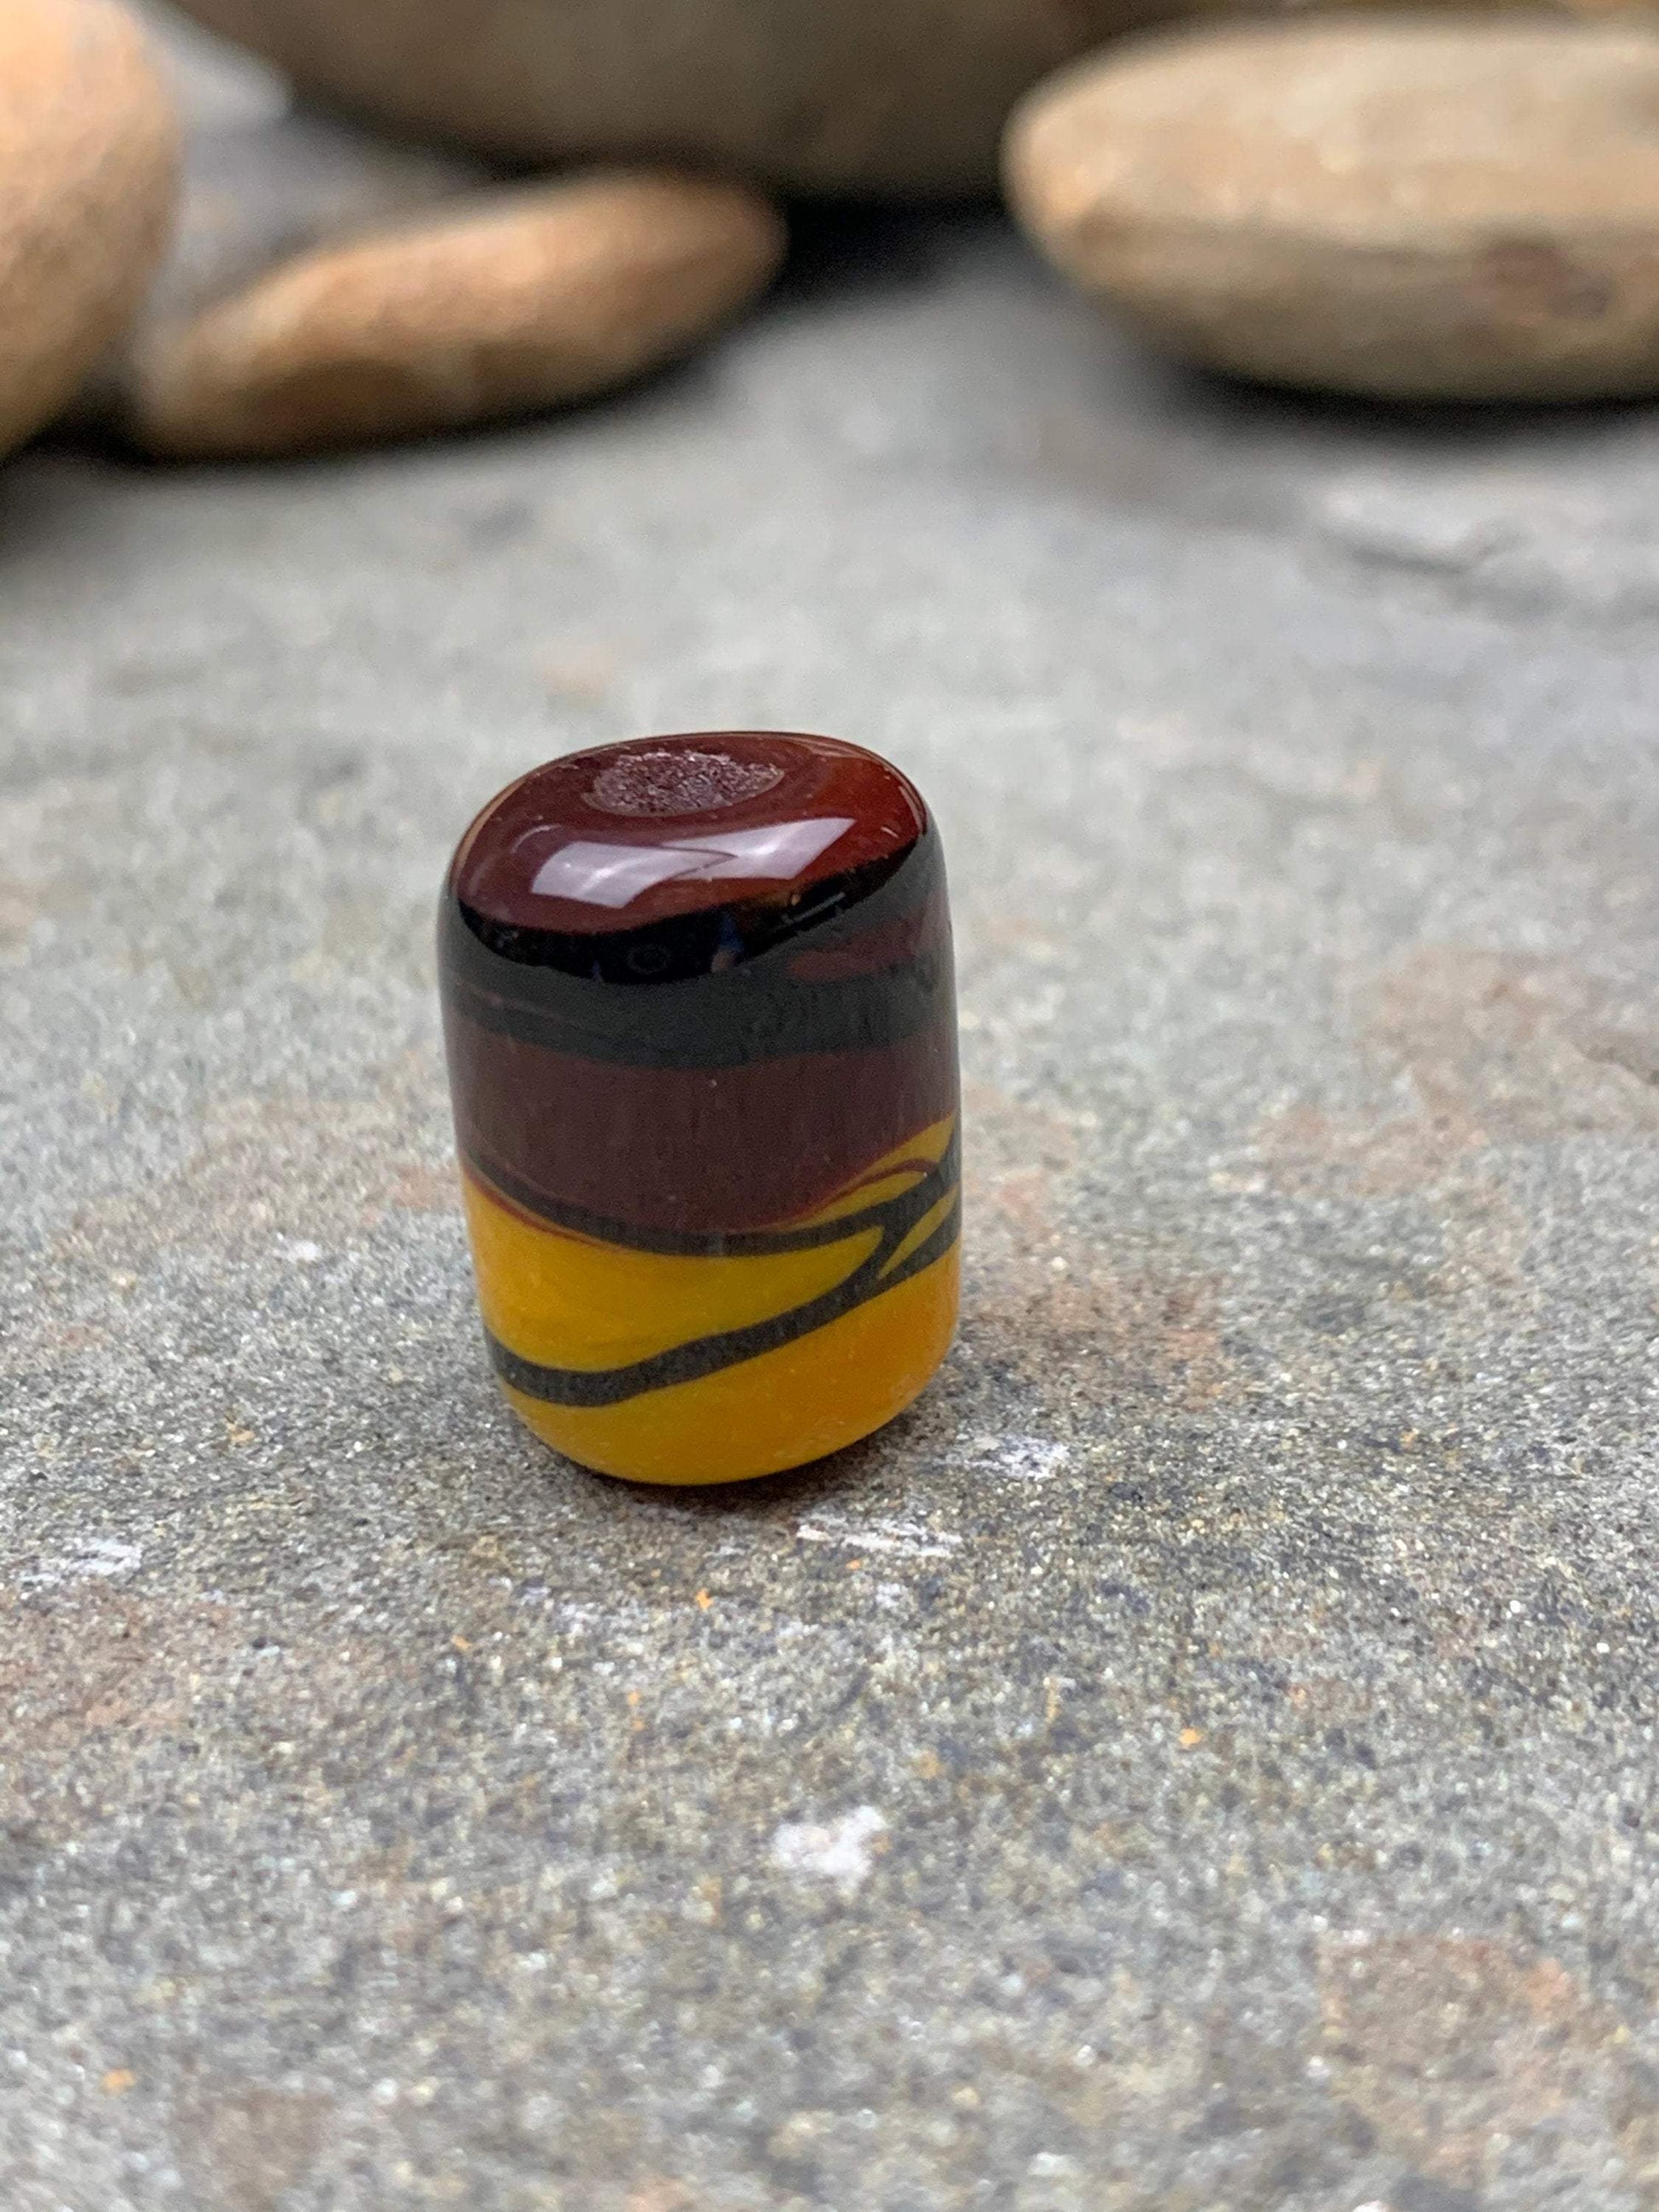 a handmade lampworked glass bead with black stripe on a yellow and brown background